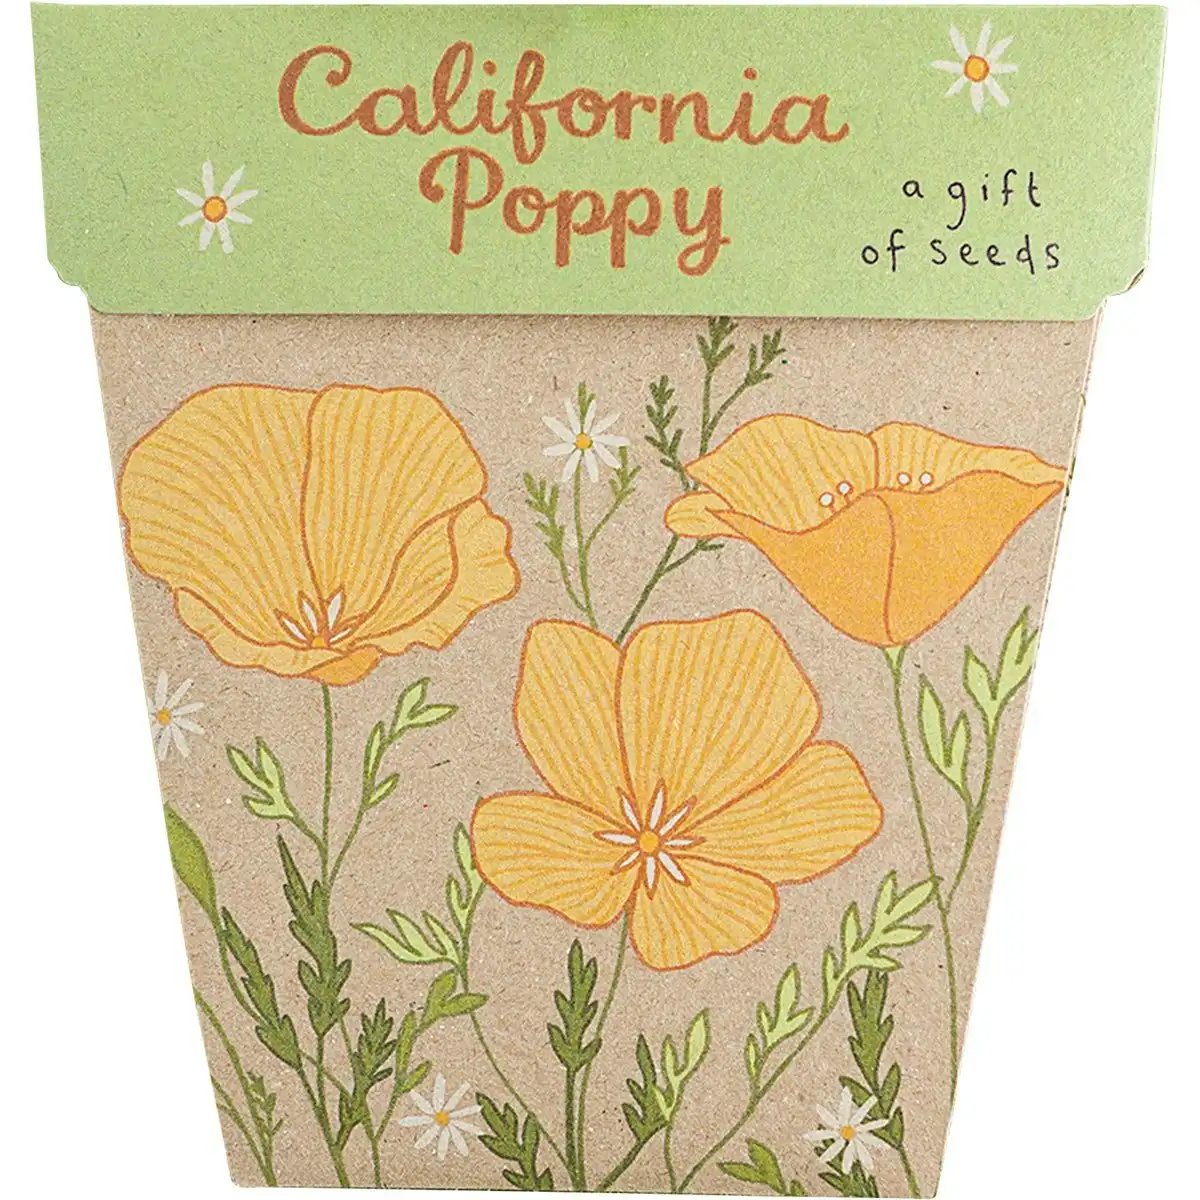 SOW 'N SOW Gift of Seeds California Poppy 1